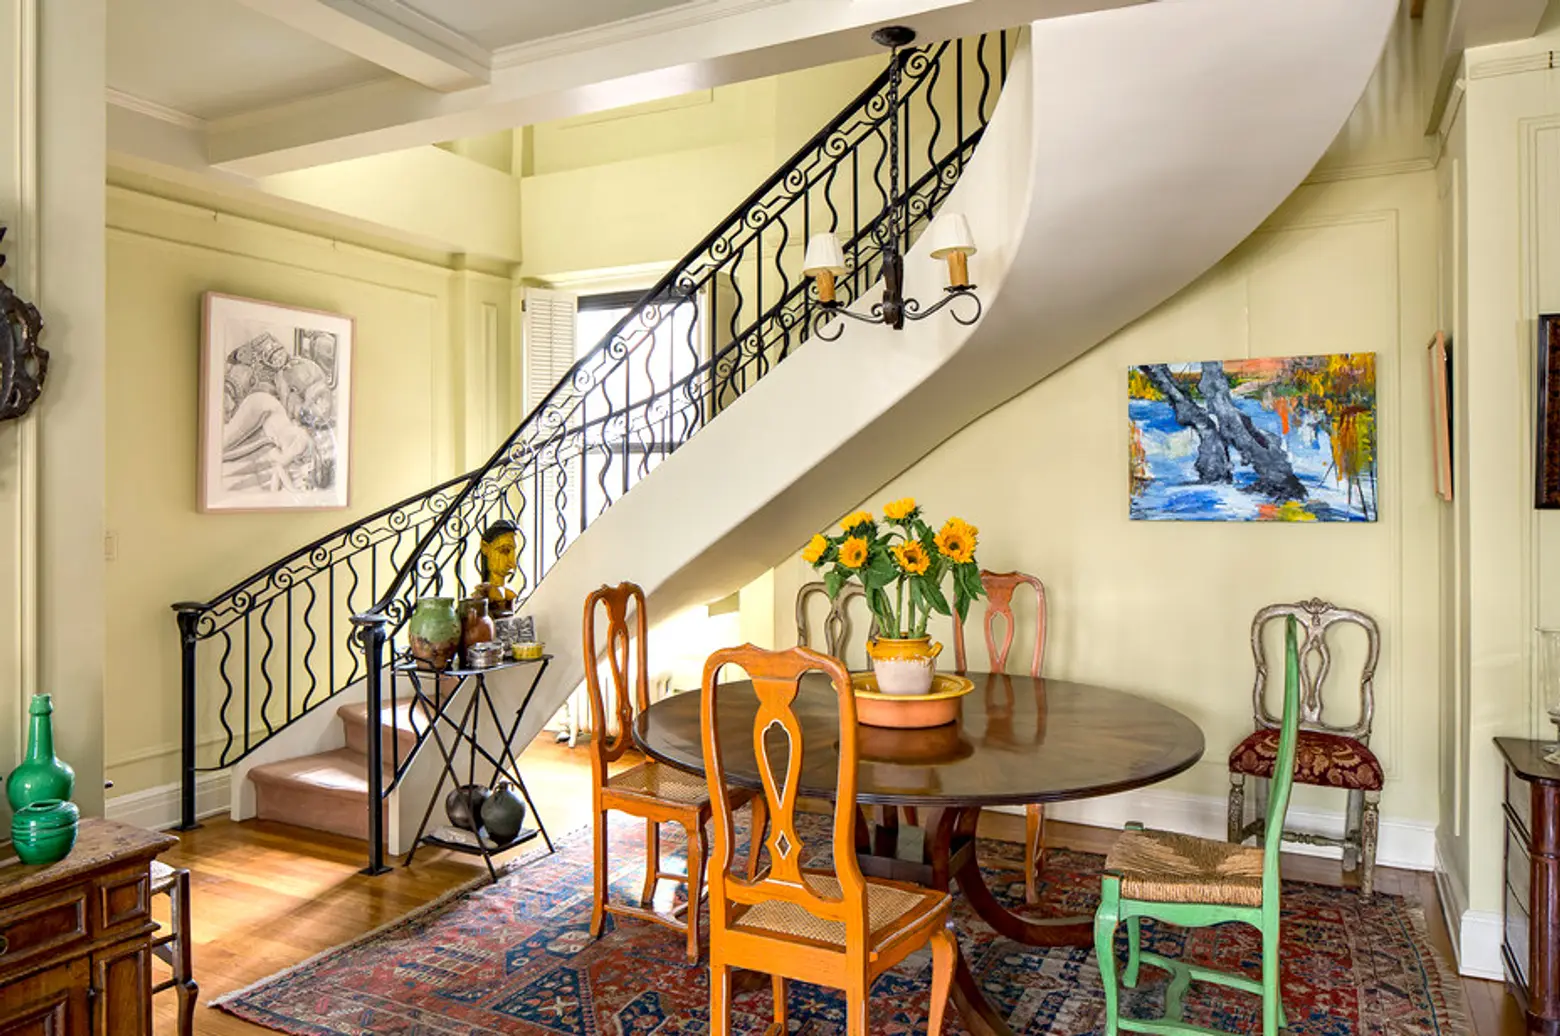 64 East 86th Street, winding staircase, wrought iron banister, abundant closet space